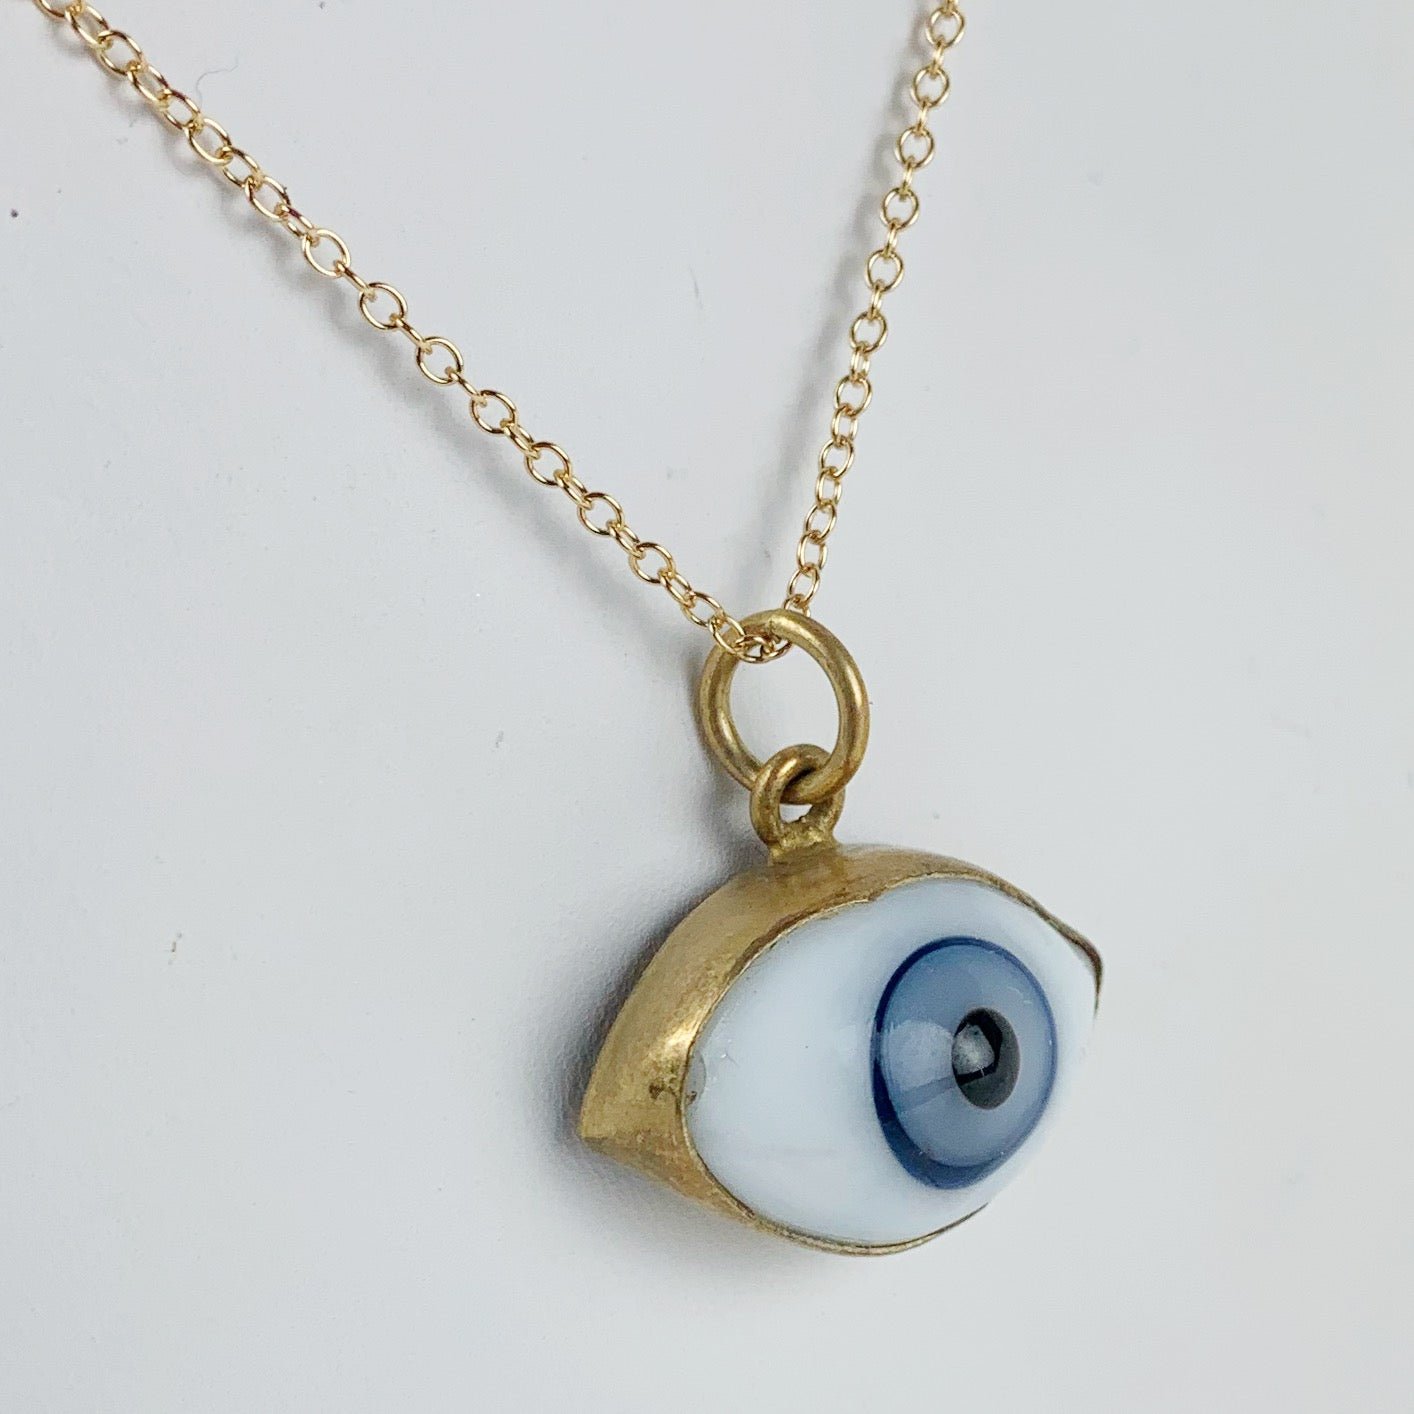 Glass Eye Necklace Small Blue - Loved To Death